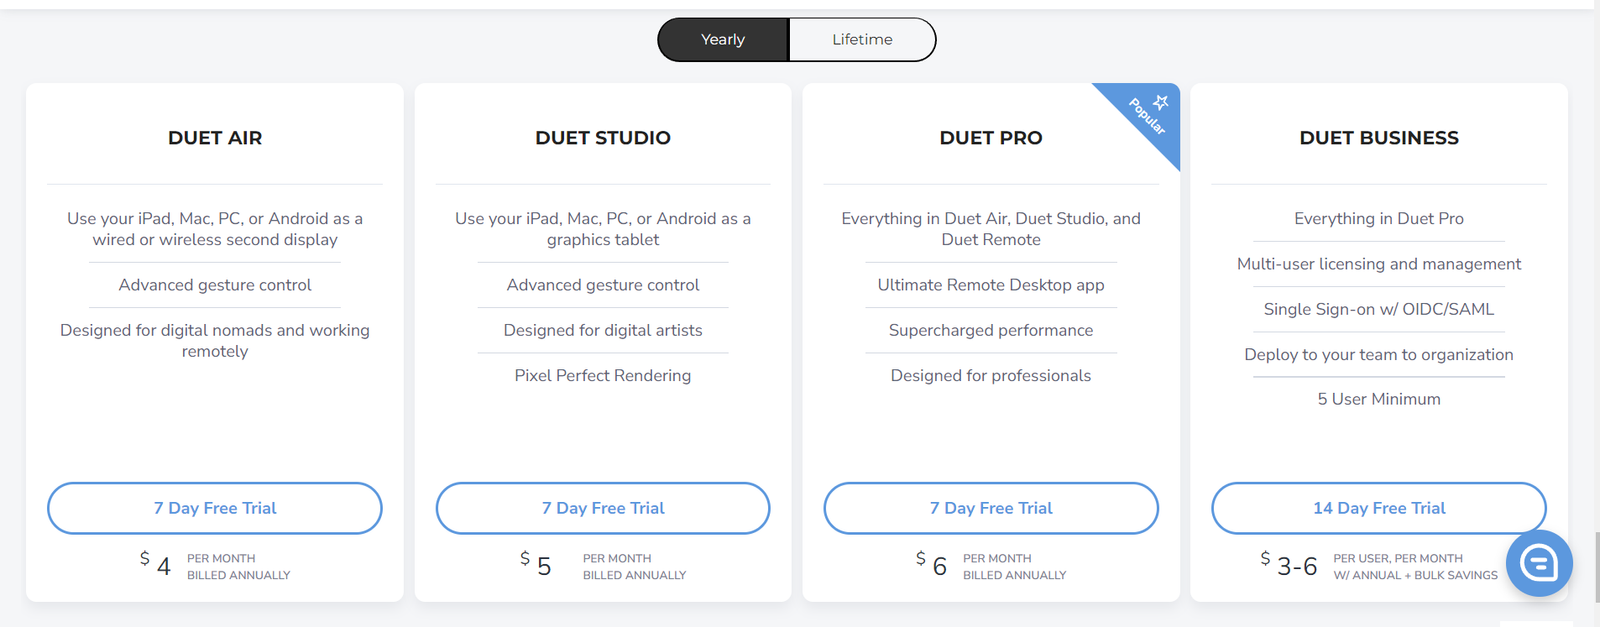 duet display software pricing plans